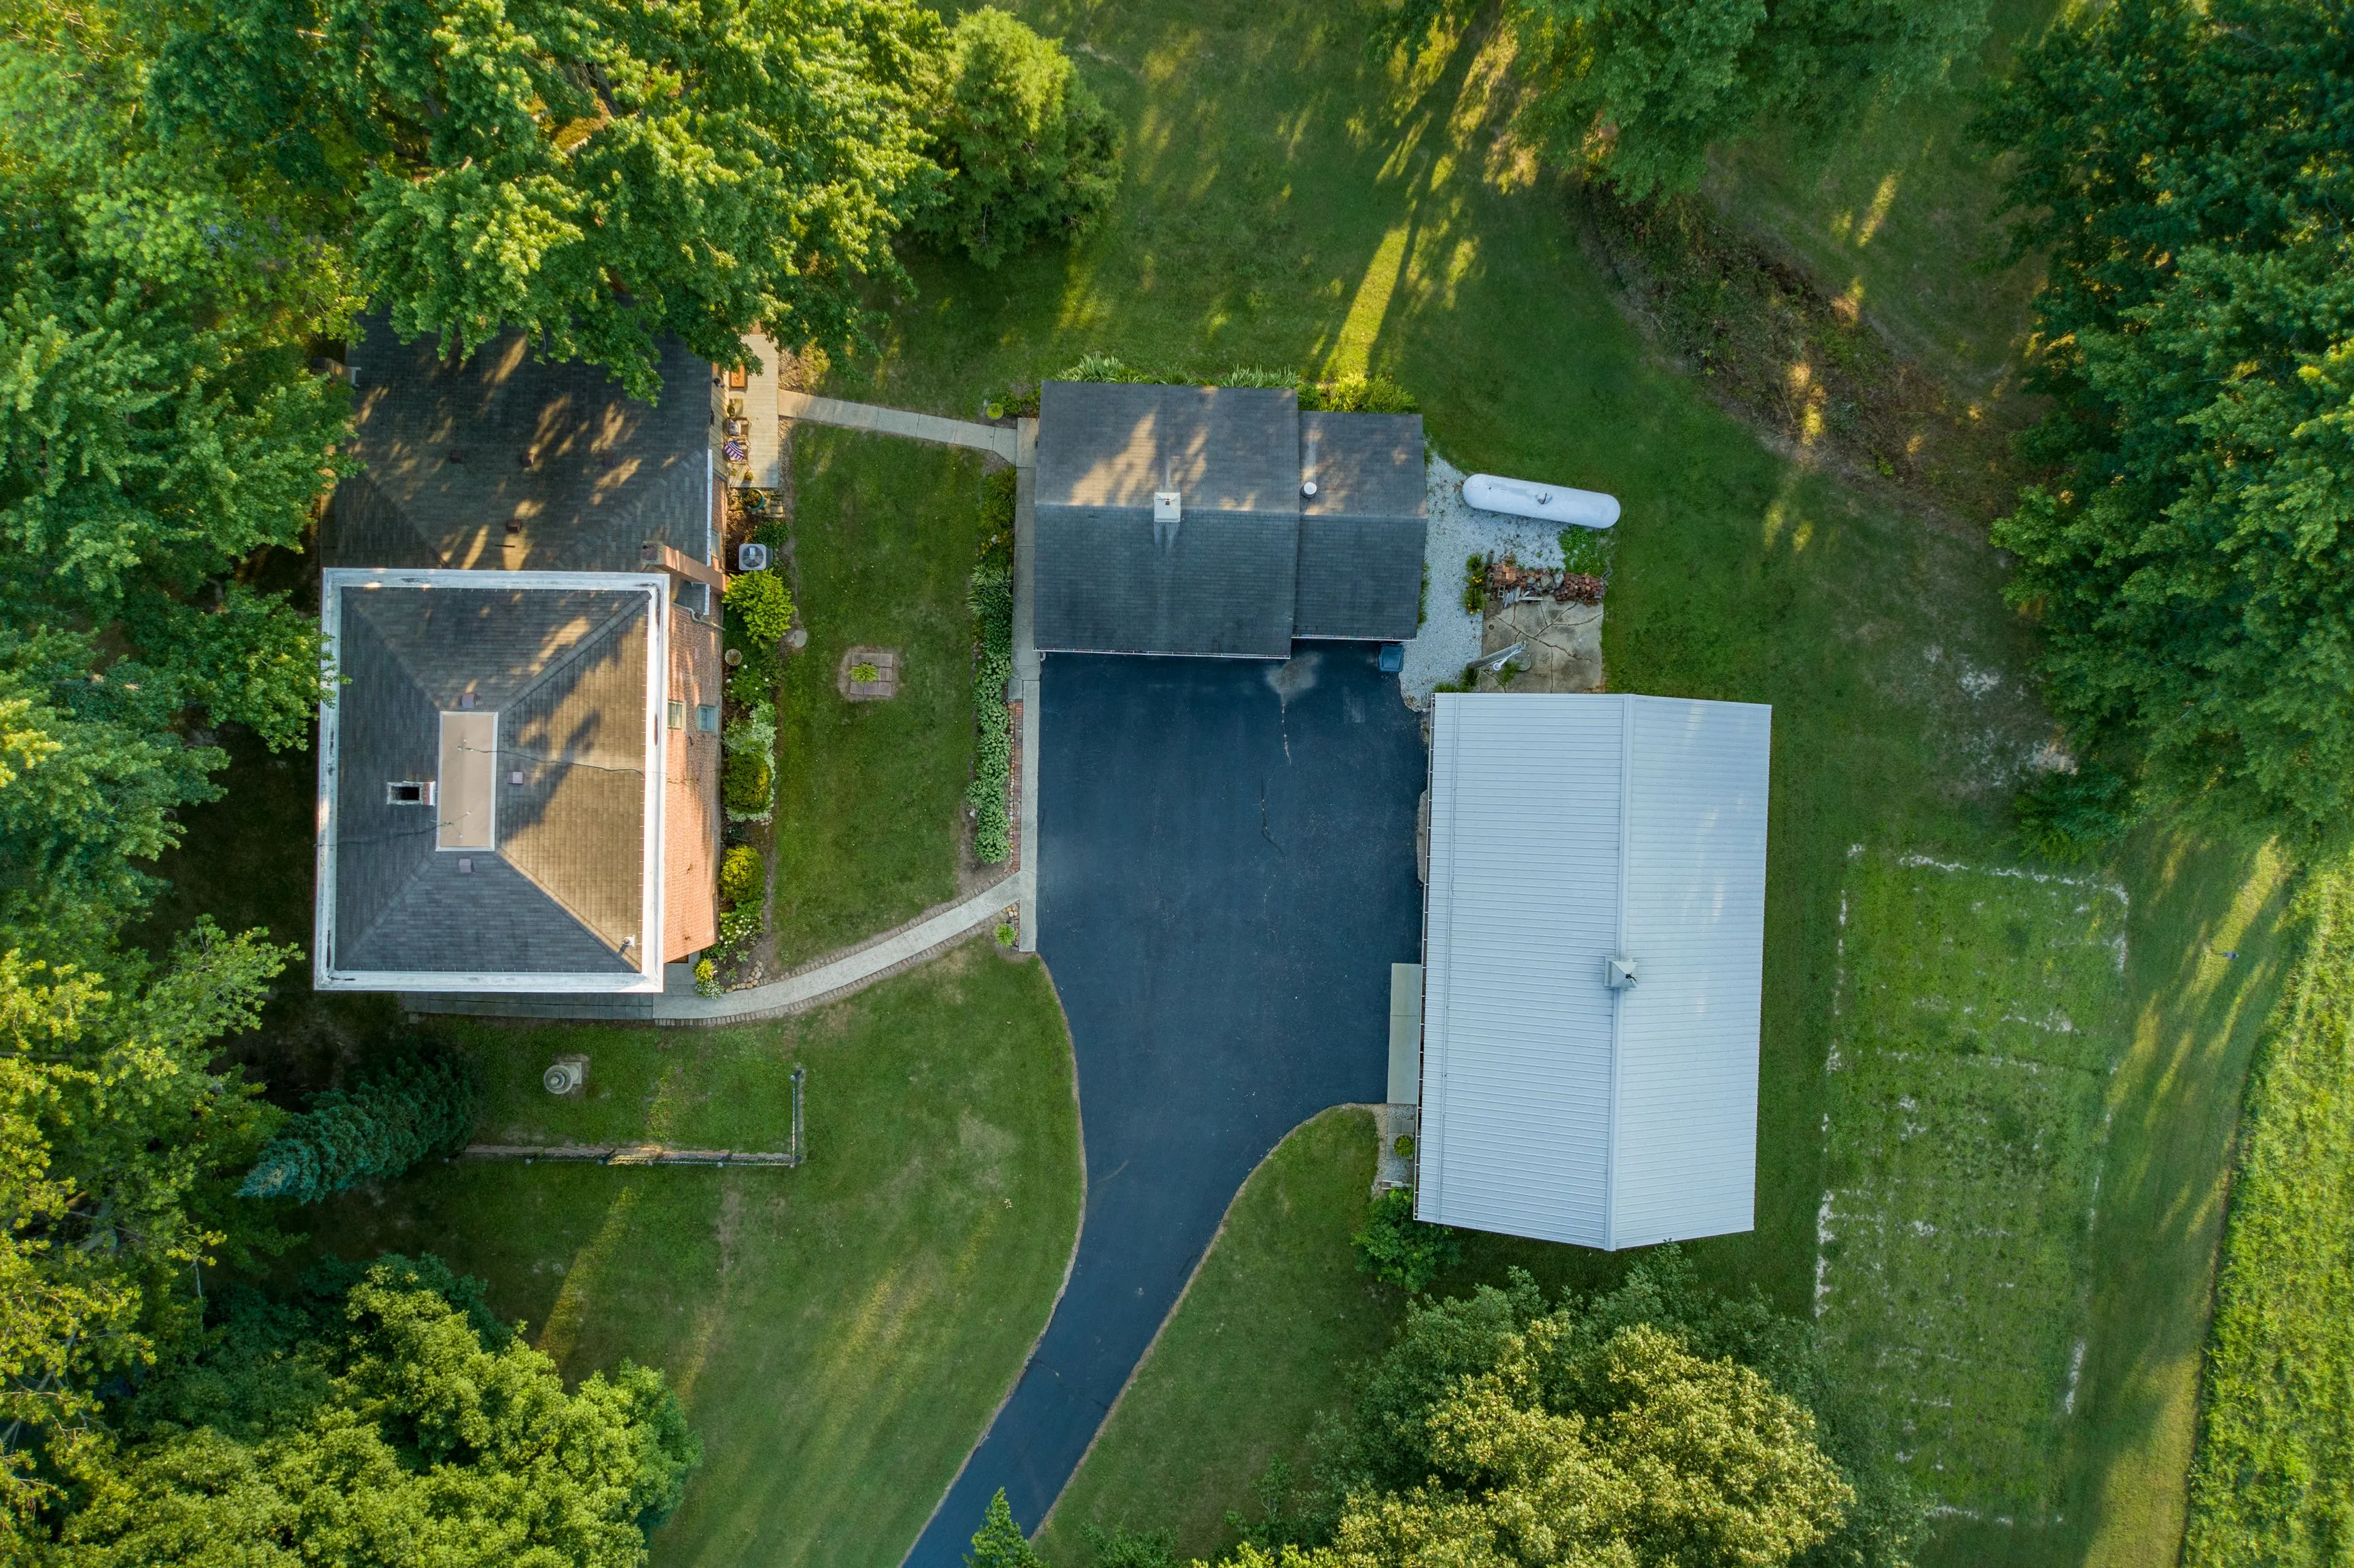 Aerial view of two houses with dark roofs surrounded by green trees and lawns with a curved driveway connecting them.